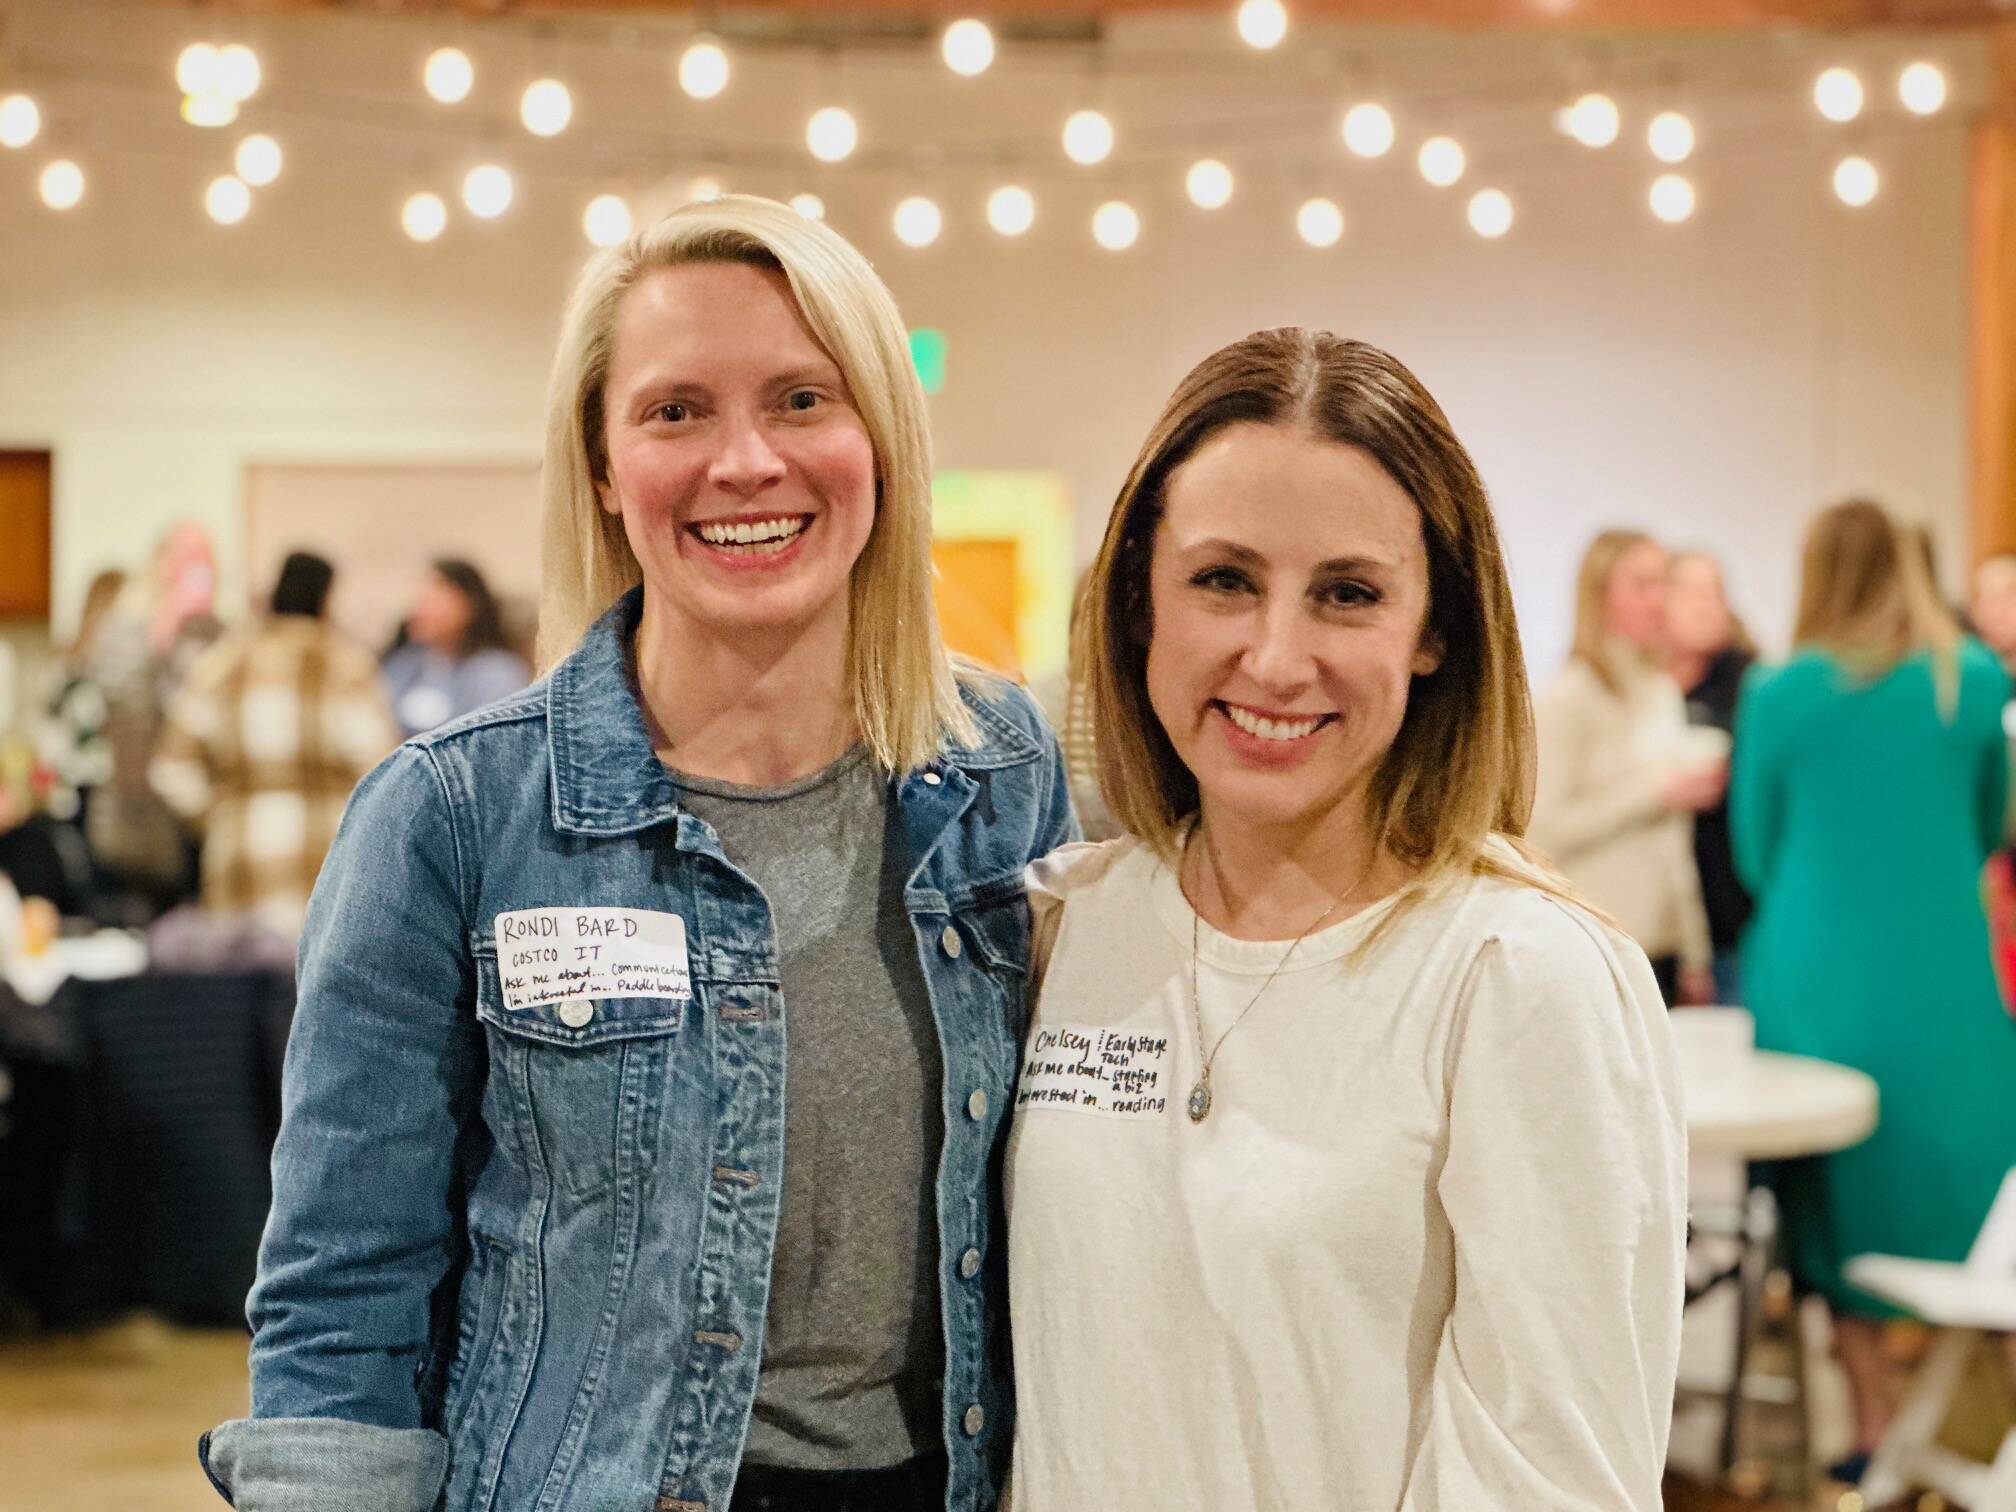 Courtesy photo.
At the Snoqualmie Valley Women in Leadership group’s inaugural gathering Jan. 31, each of the attendees wore name tags that specified what they wanted to be asked about, and participated in various engagement activities.